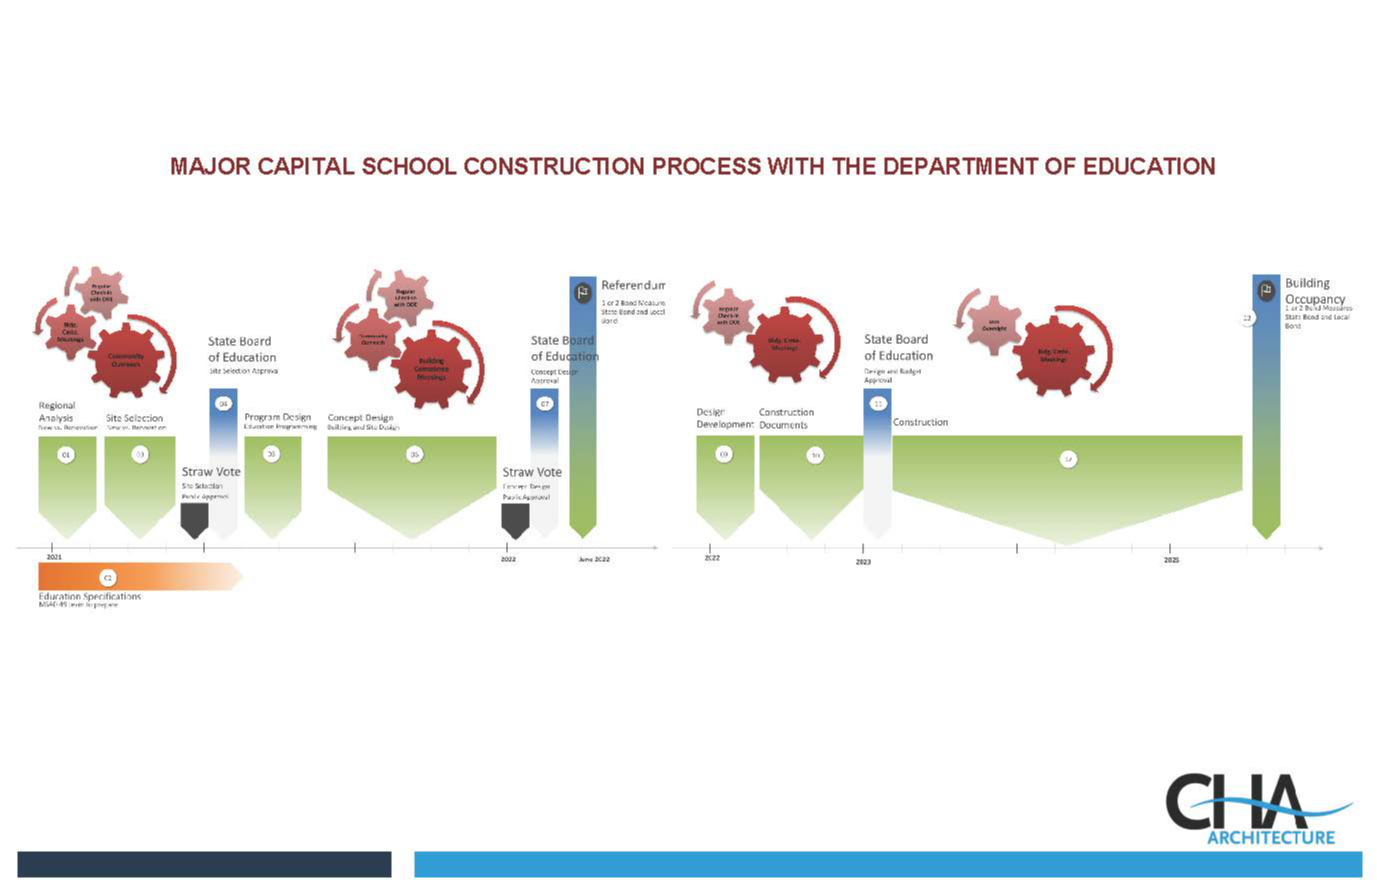 Major capital school construction process with the Department of Education